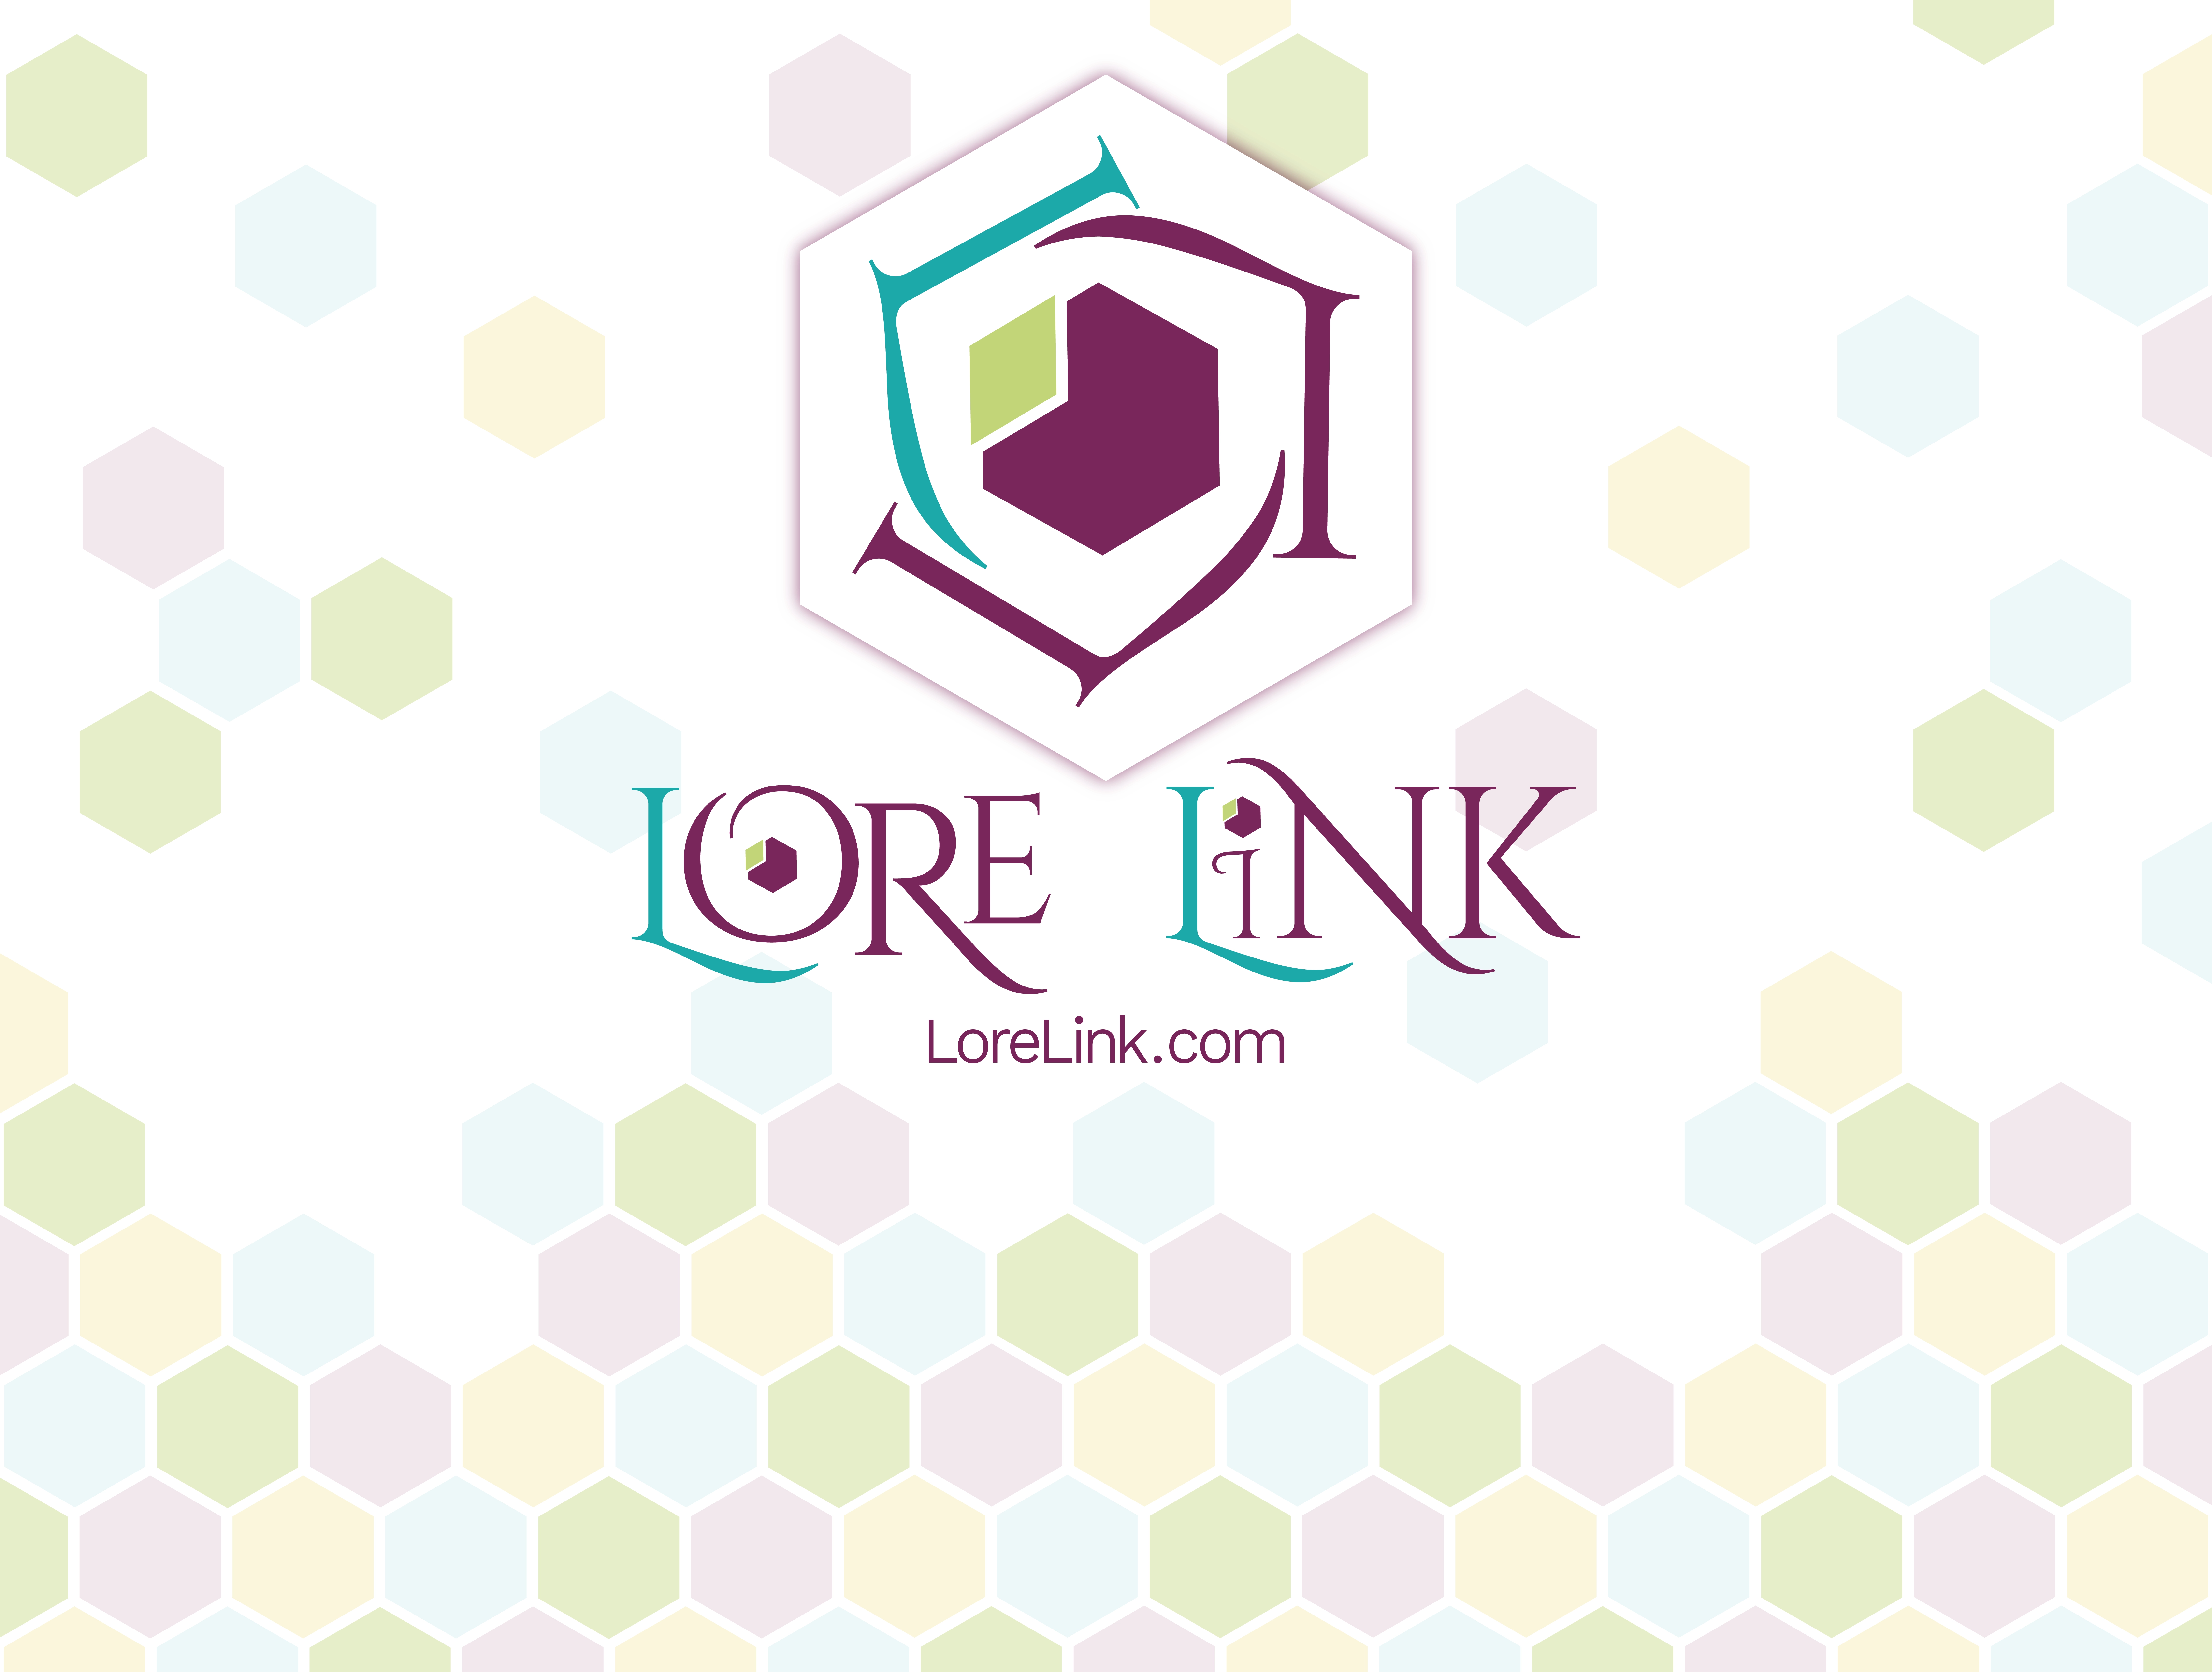 An image of the backdrop for the Lore Link booth. It is the Lore Link Logo and Wordmark as well as the company website: www.lorelink.com as well as multicolored hexes in the background.